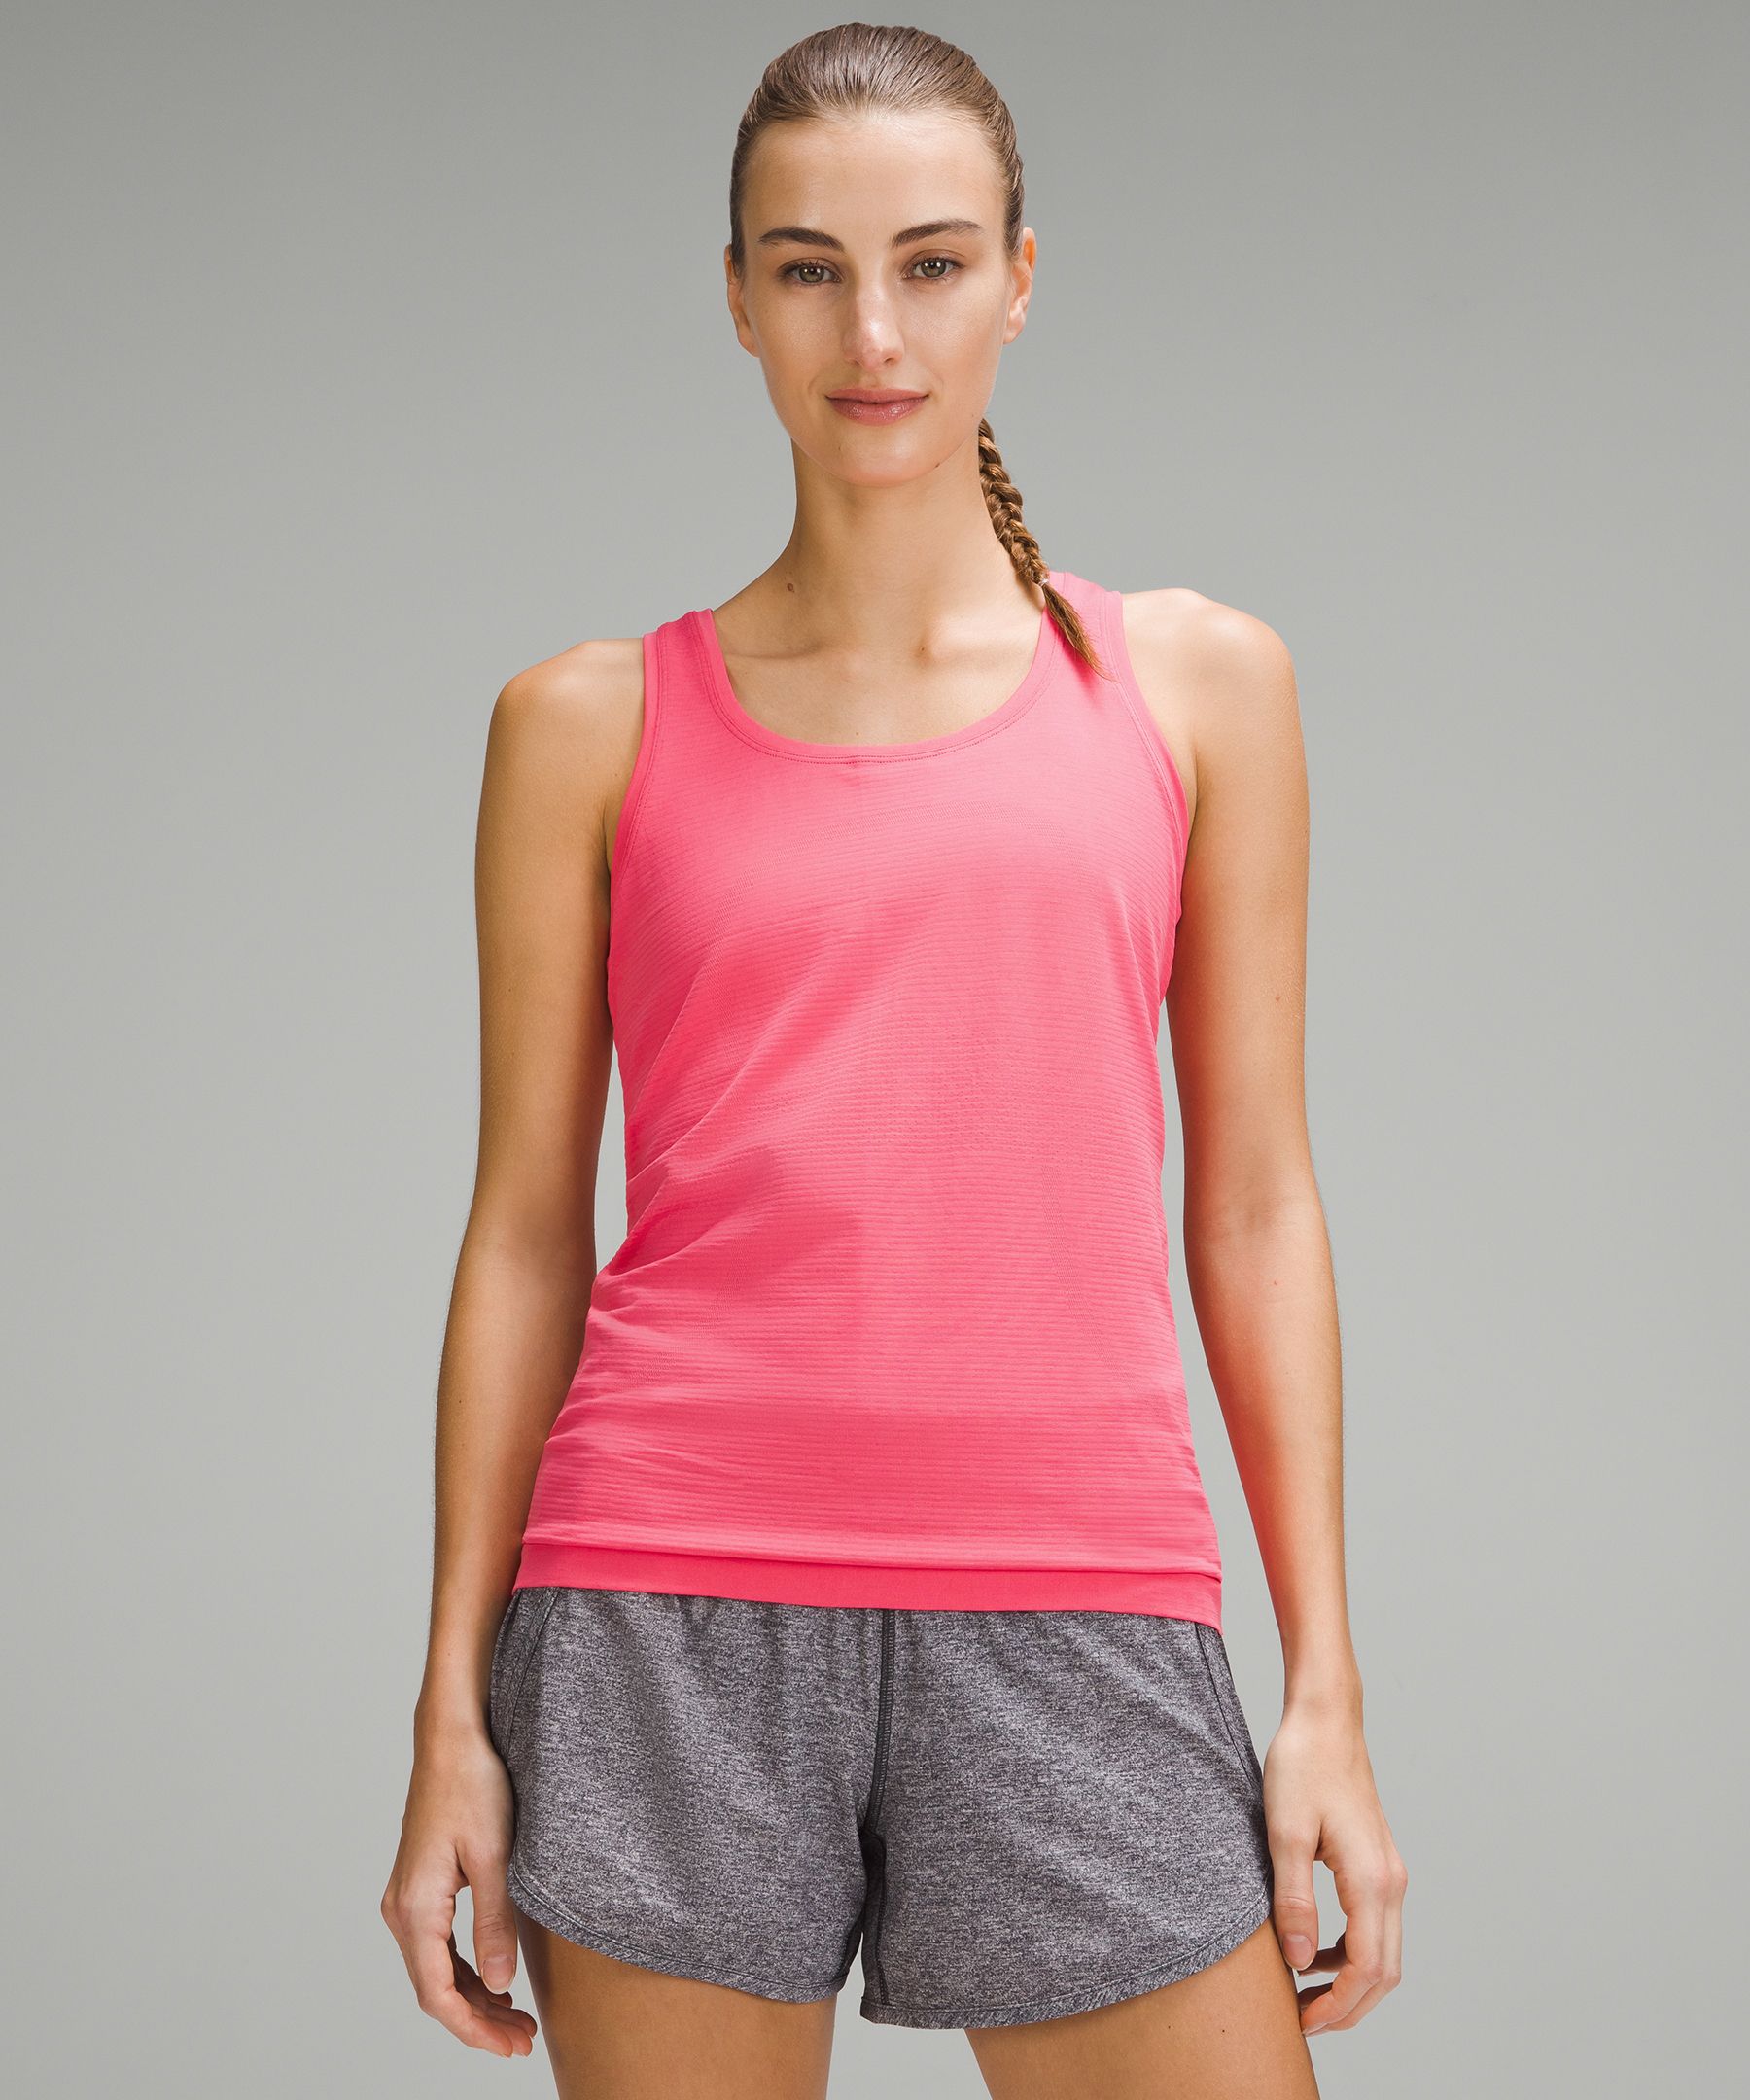 lululemon - The Deep V Tank - supportive for the bust and body skimming for  the curves.  .com/products/clothes-accessories/theyre-back/Deep-V-Tank-72873?cid=fbtheyreback  Why We Made This: Our classic crossfront with moderate support